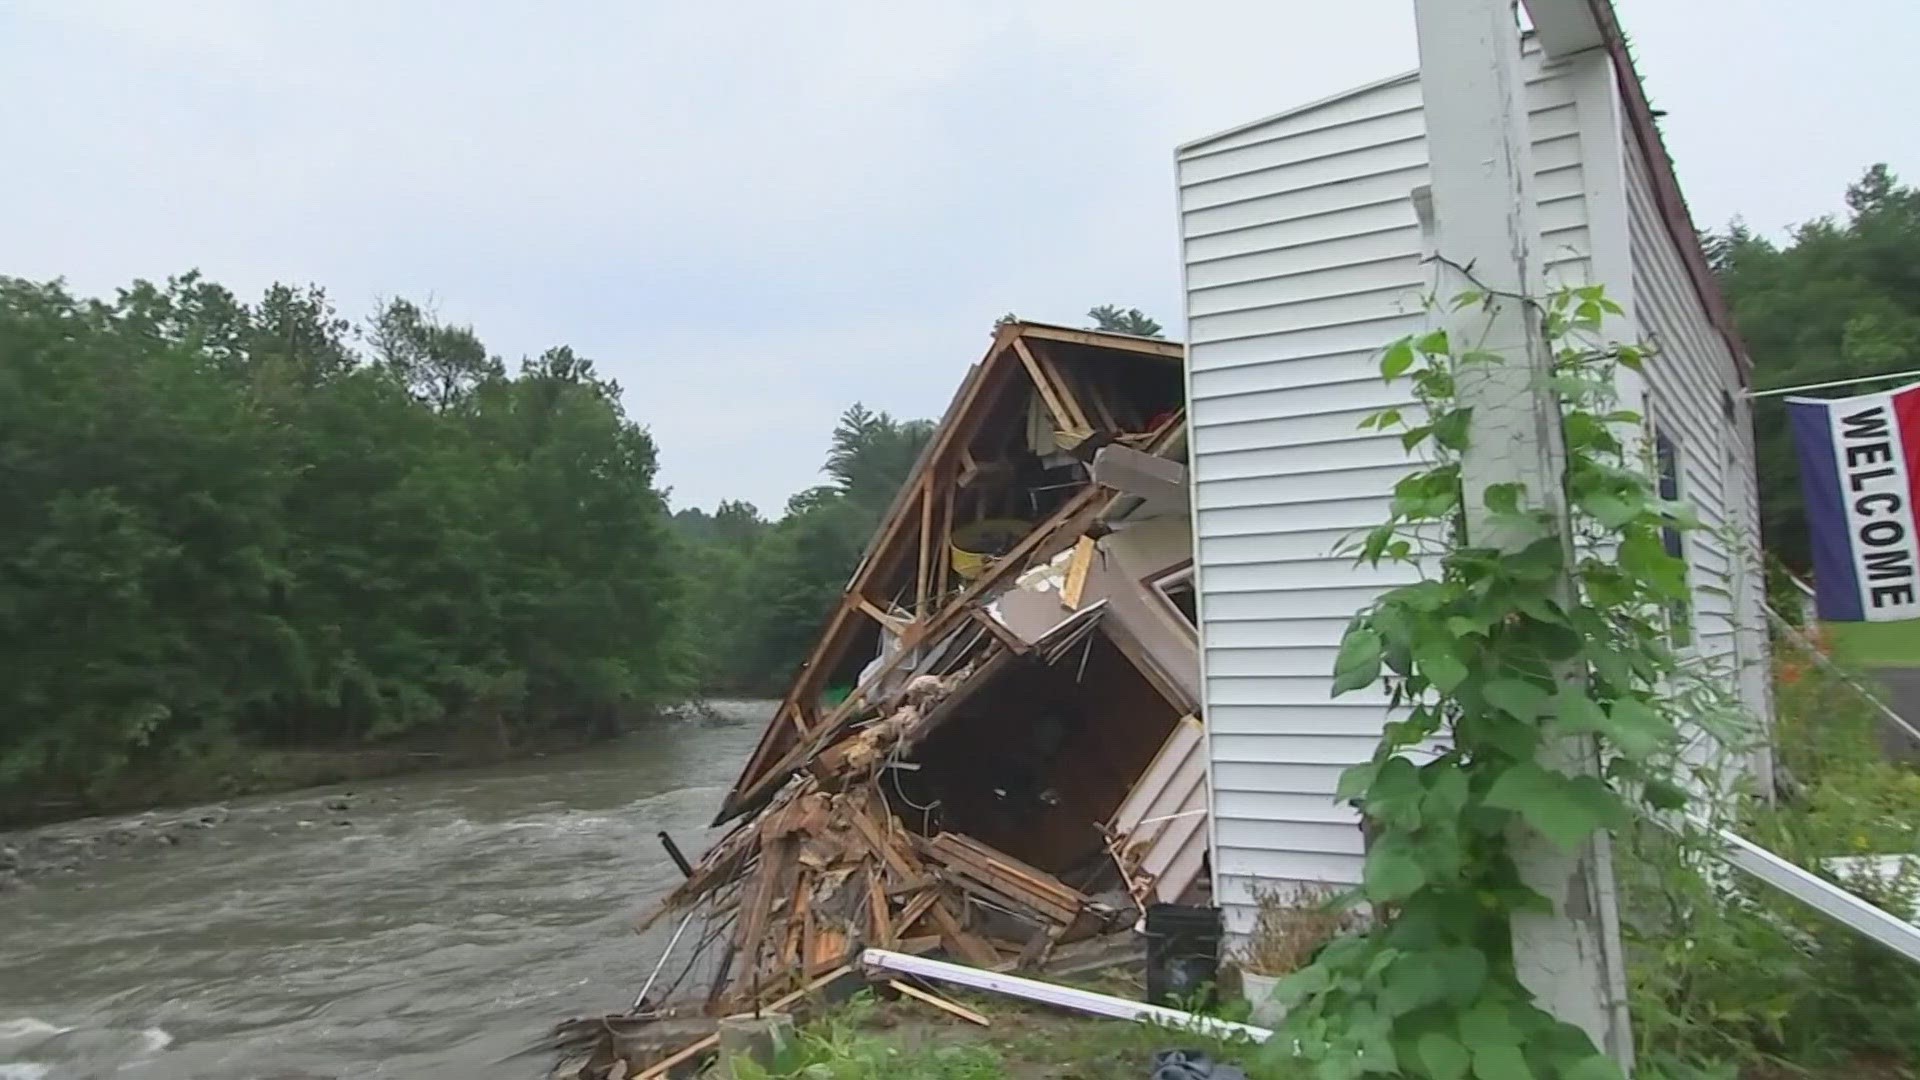 FEMA officials visited Vermont to see the damage firsthand.